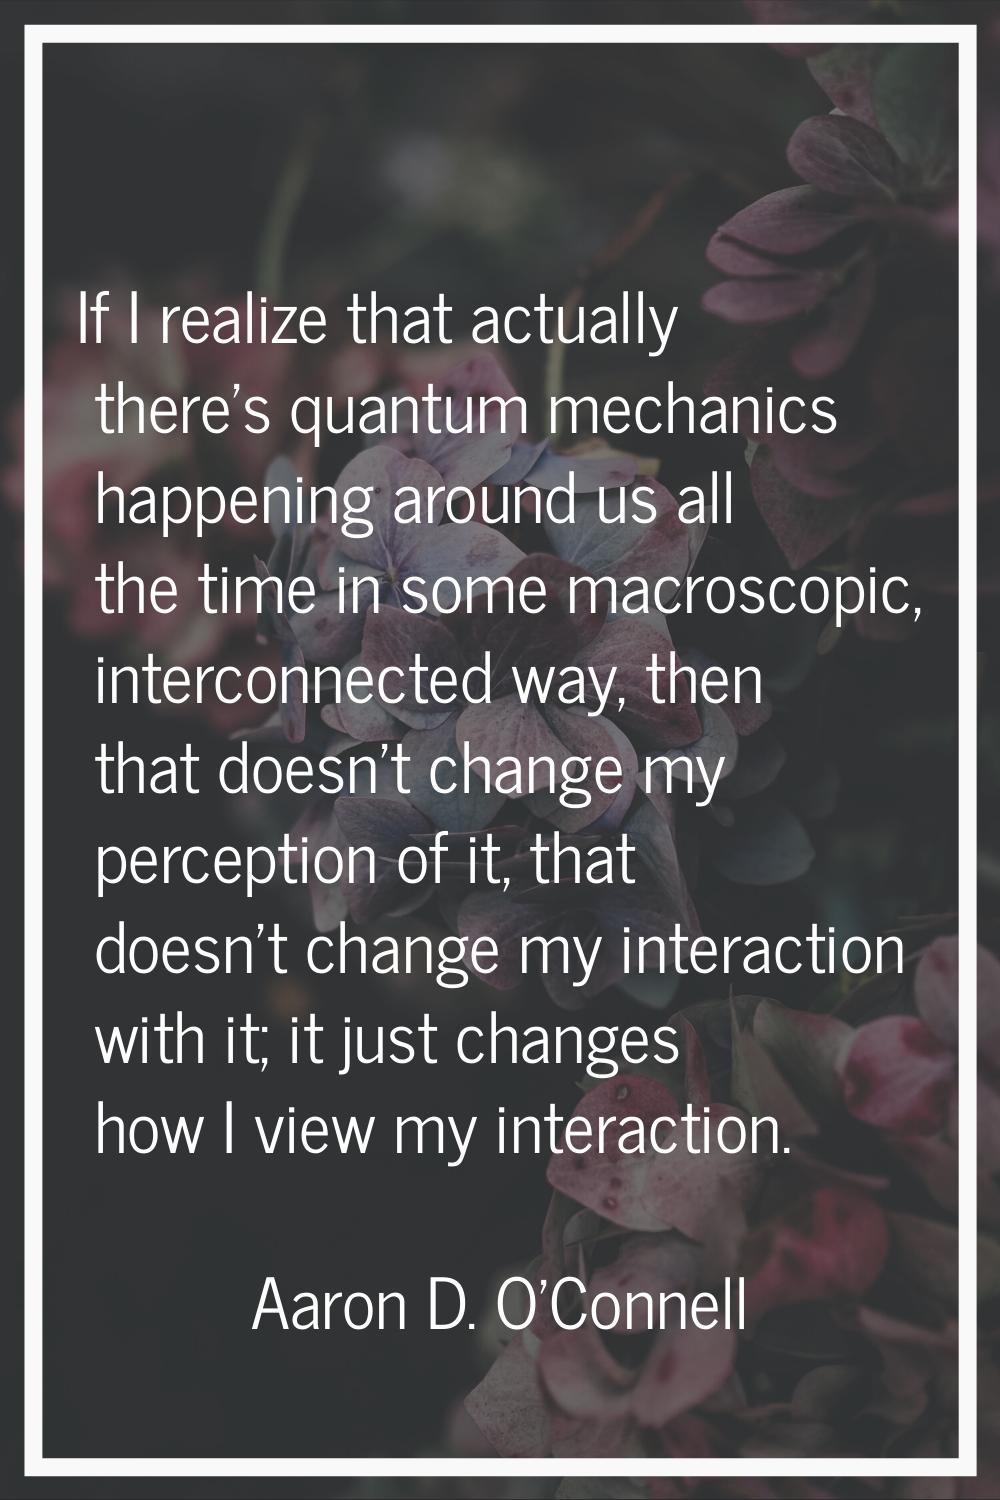 If I realize that actually there's quantum mechanics happening around us all the time in some macro